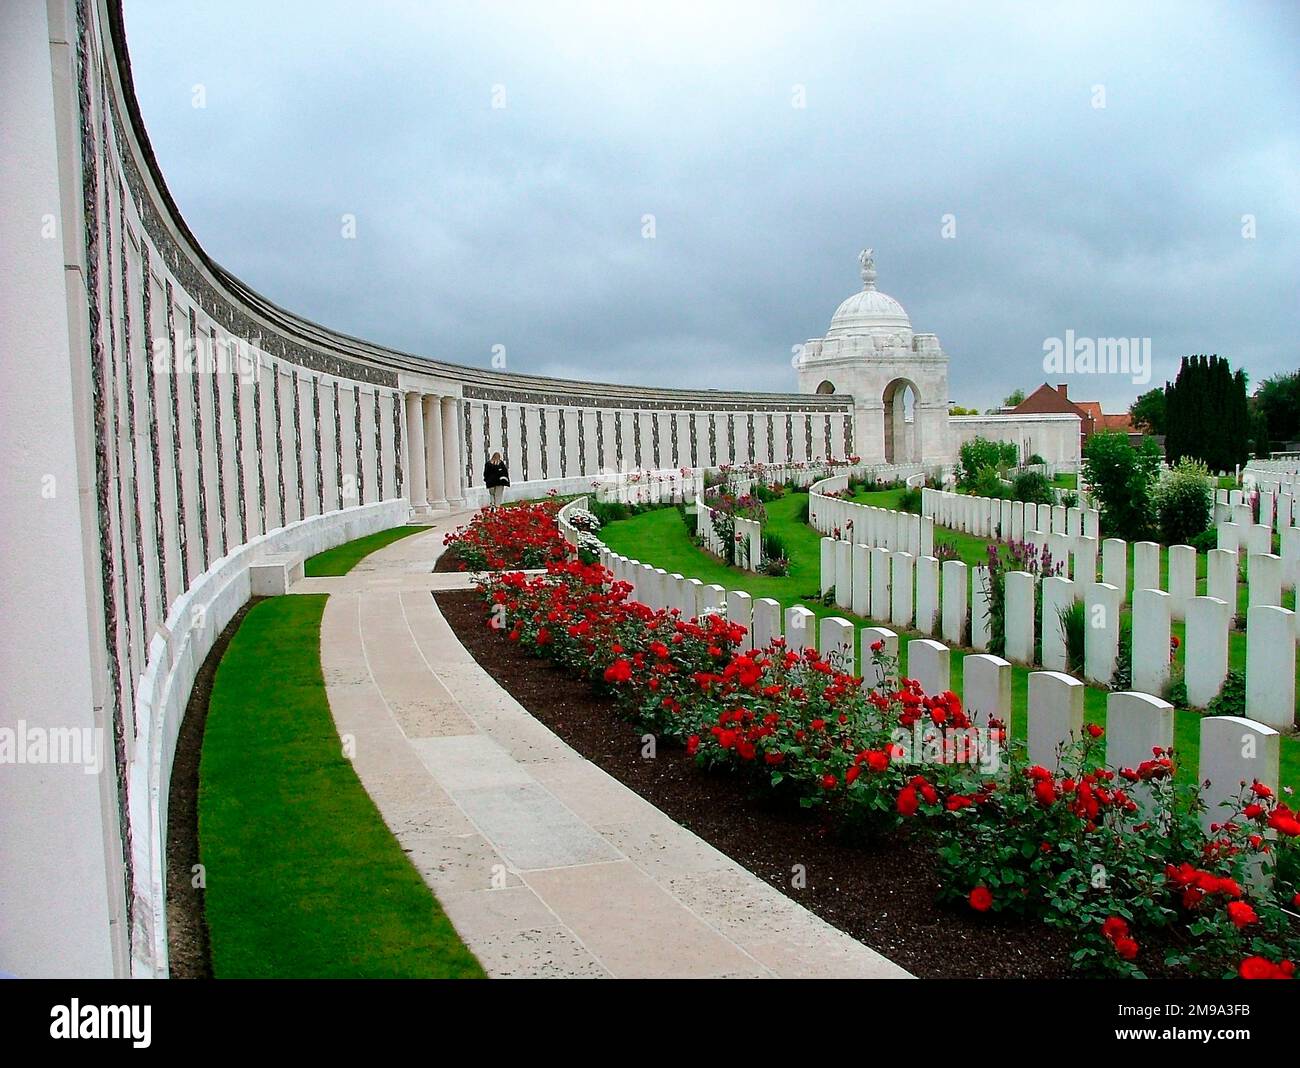 This is the largest British War Cemetery in the world and was designed by Sir Hebert Baker (who designed the tomb of Cecil Rhodes in Delhi). At the top end is a Memorial Wall on which are recorded the Names of the Missing for whom there was no room on the Menin Gate. In the top centre is a uneven array of headstones which are the battlefield graves from October 1917. There are almost 12,000 burials here and approaching 35,000 names on the Memorial Wall. Stock Photo